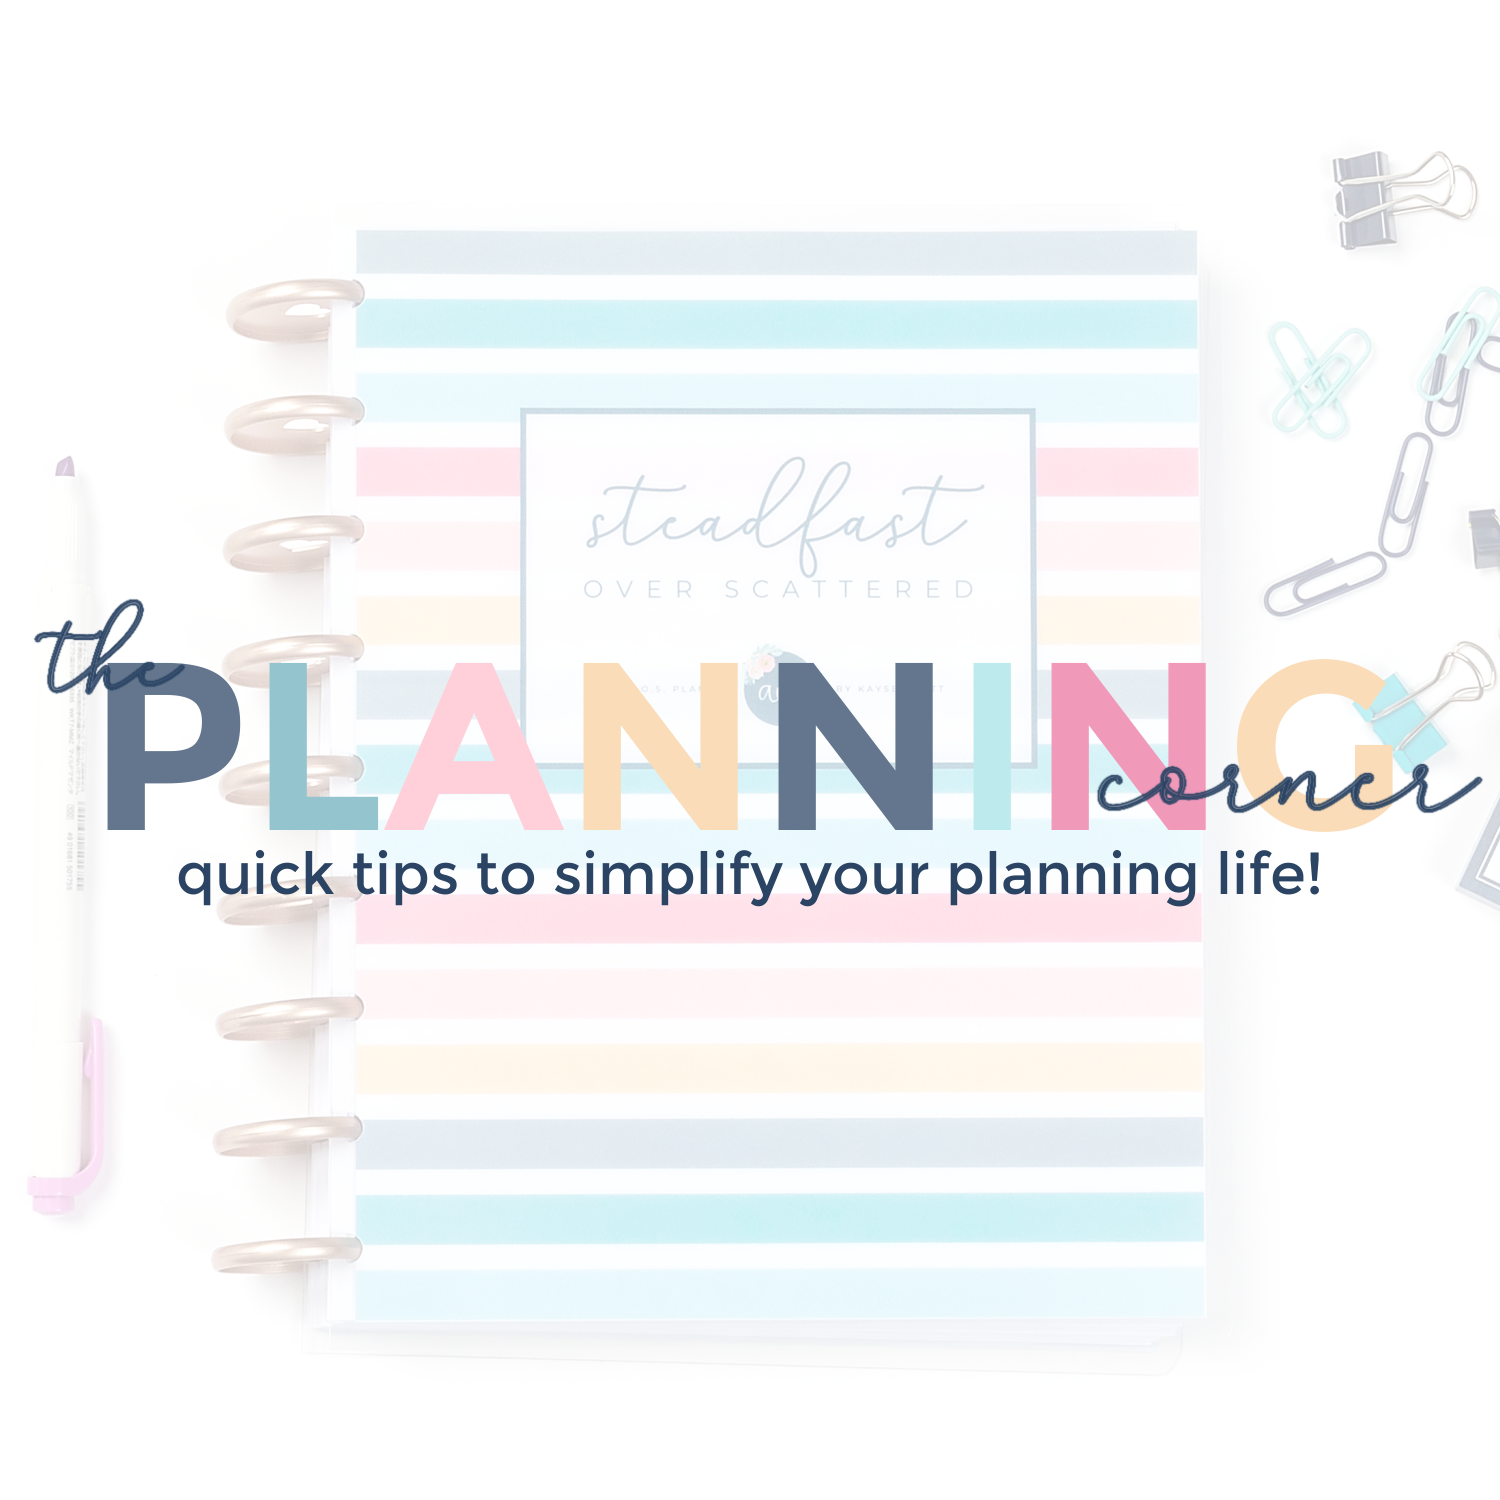 Tired of your planner layout? Switch it up!